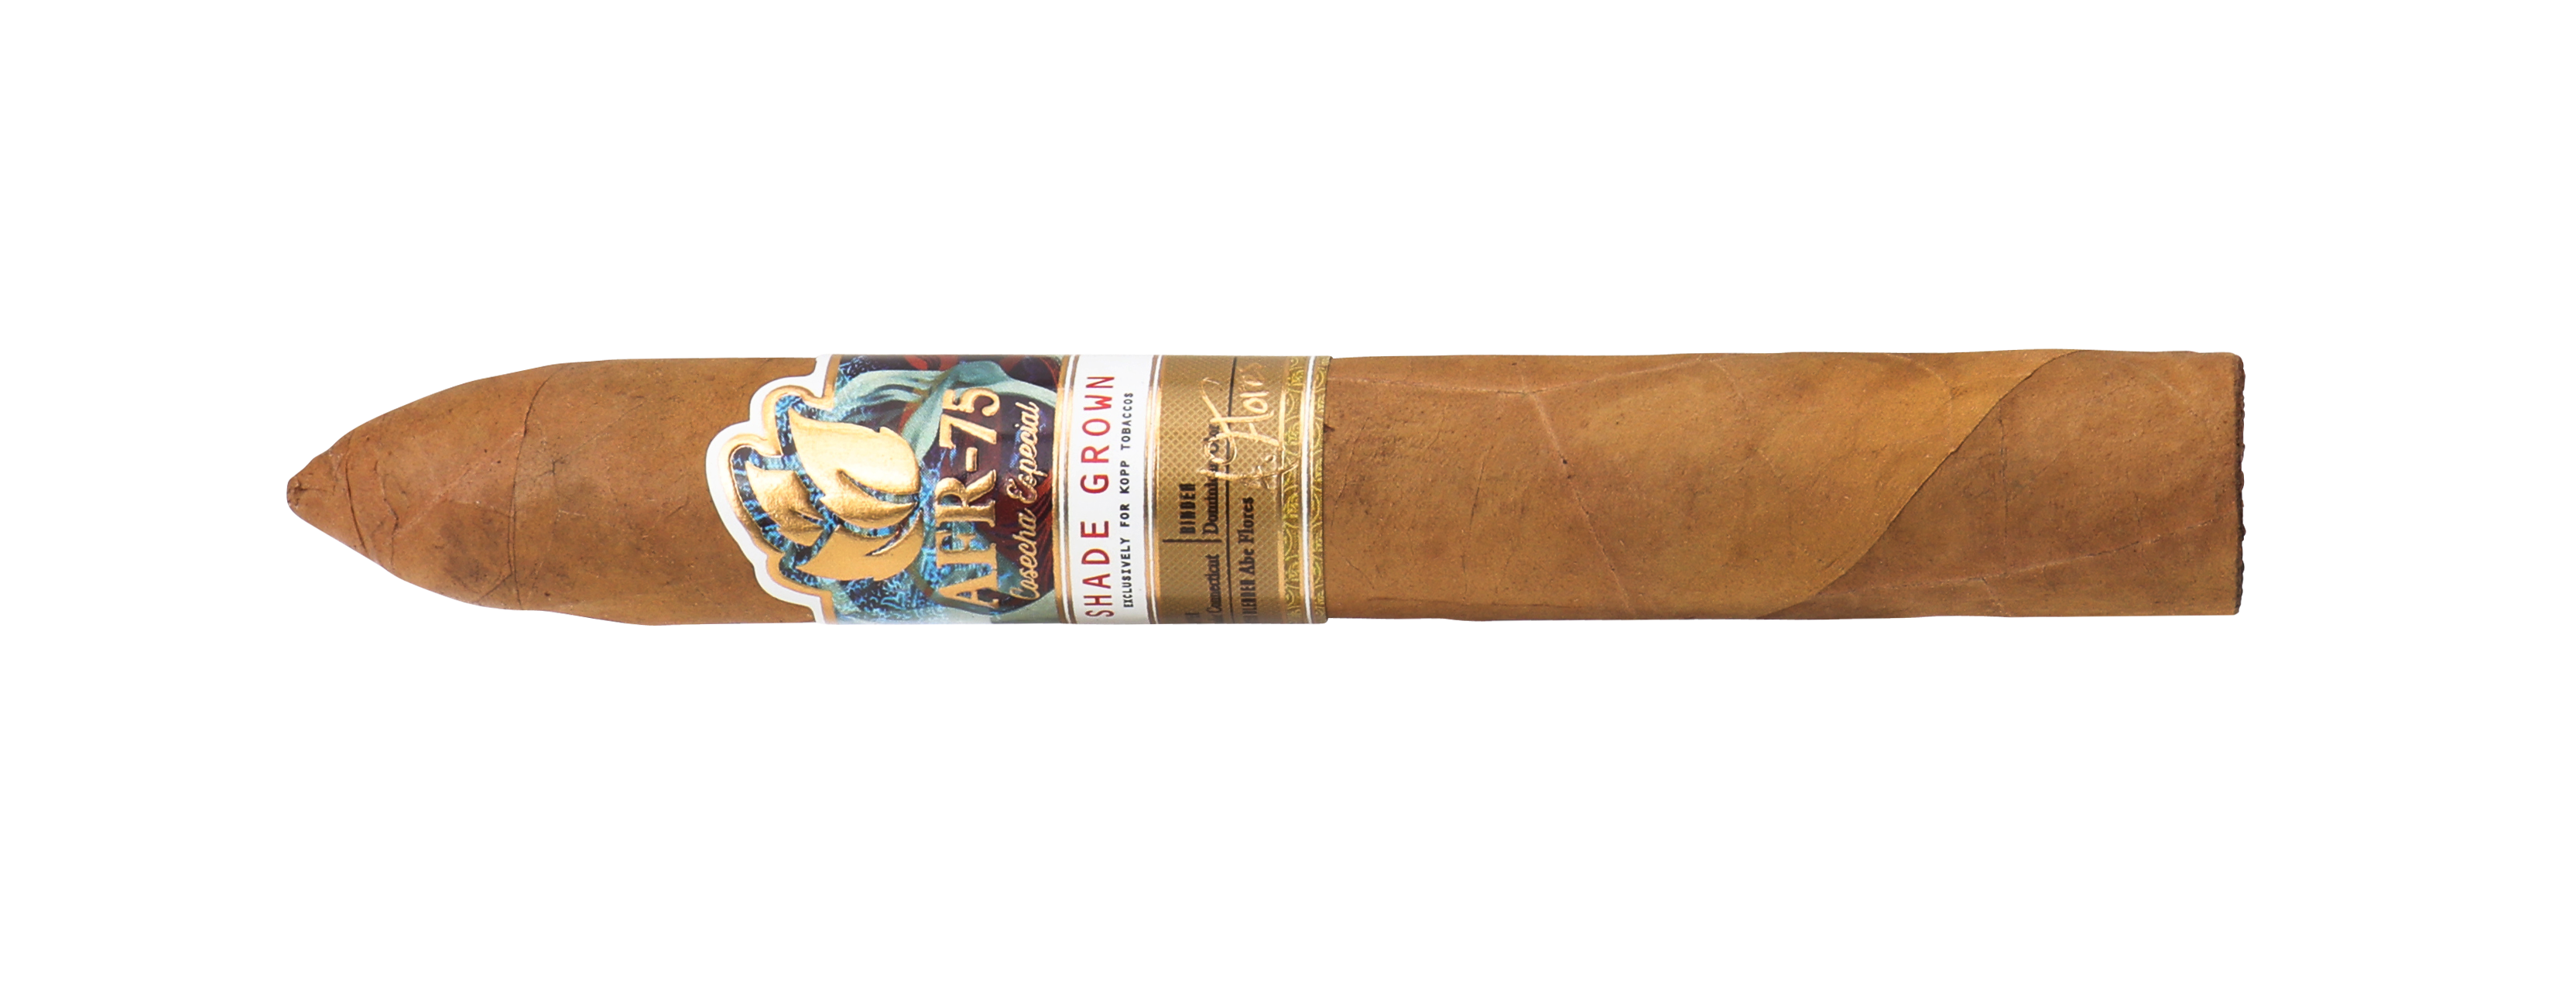 PDR - AFR 75 Belicoso